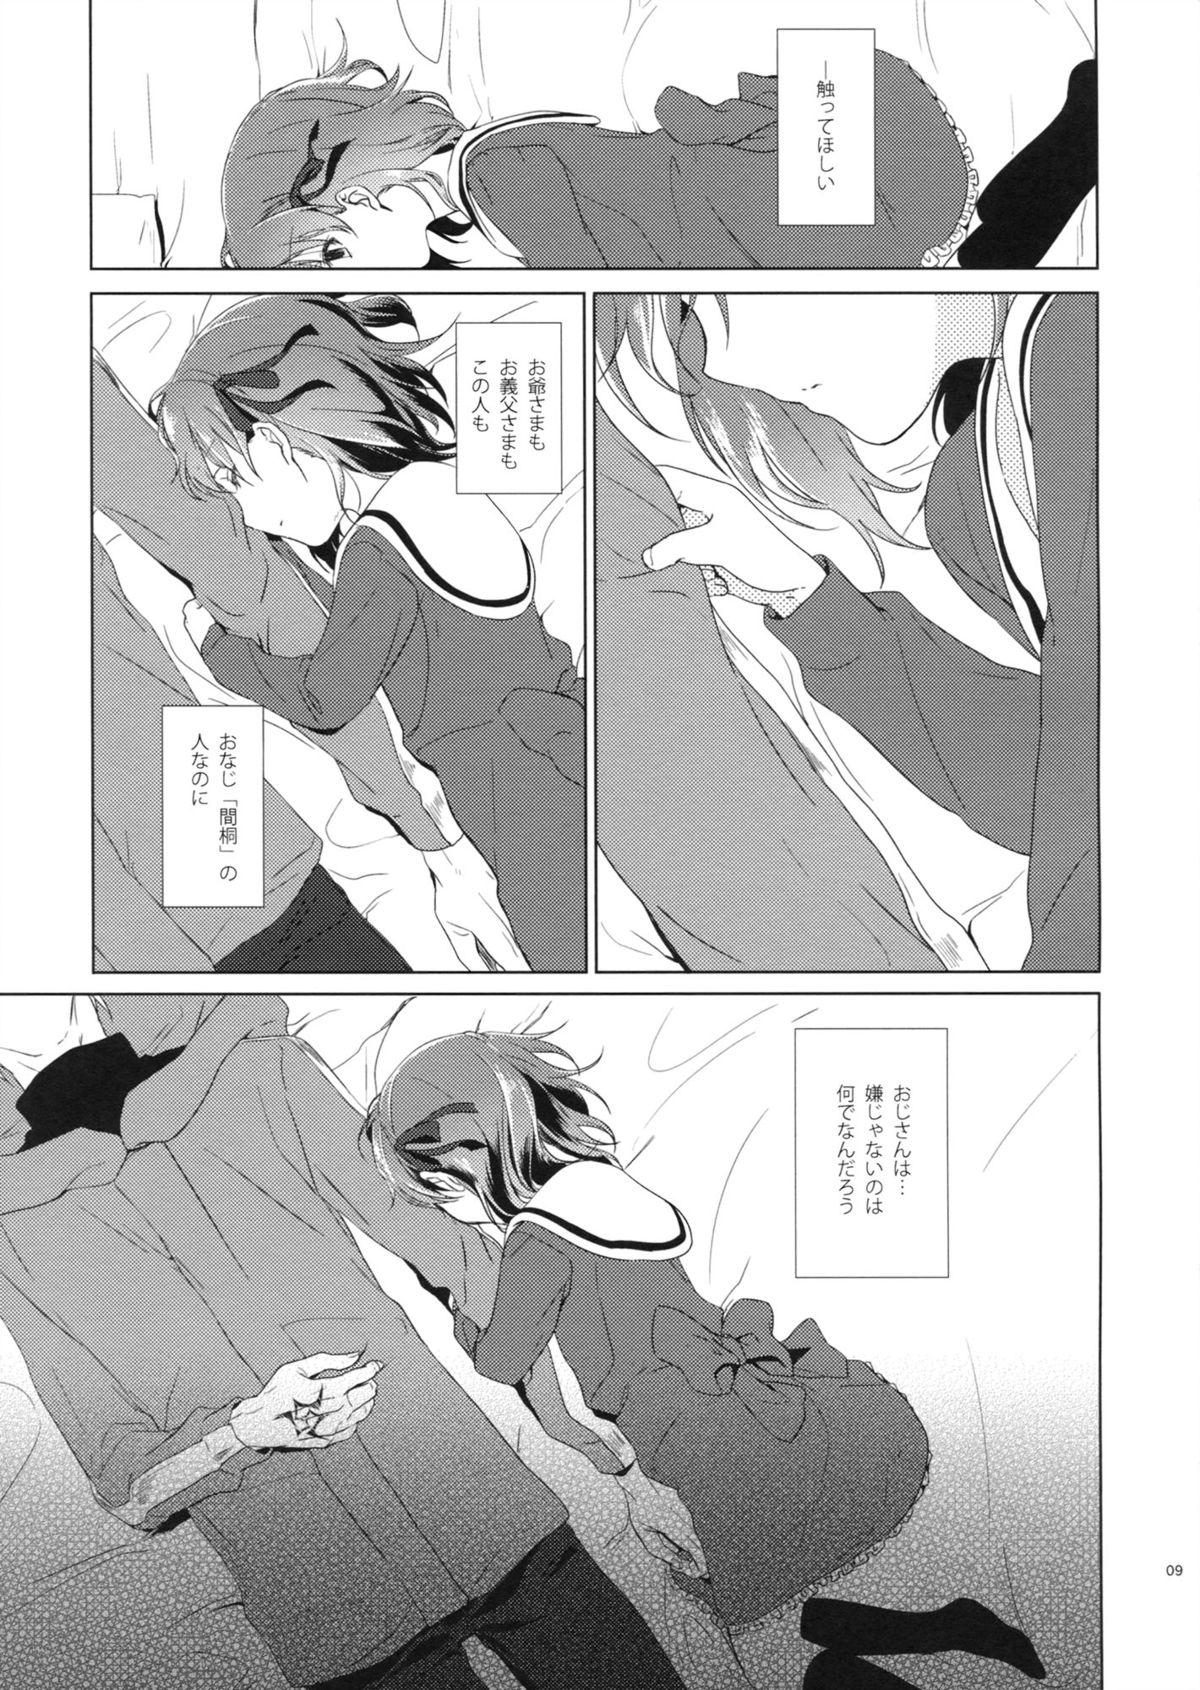 Toilet UNDER MY SKIN - Fate zero Time - Page 8